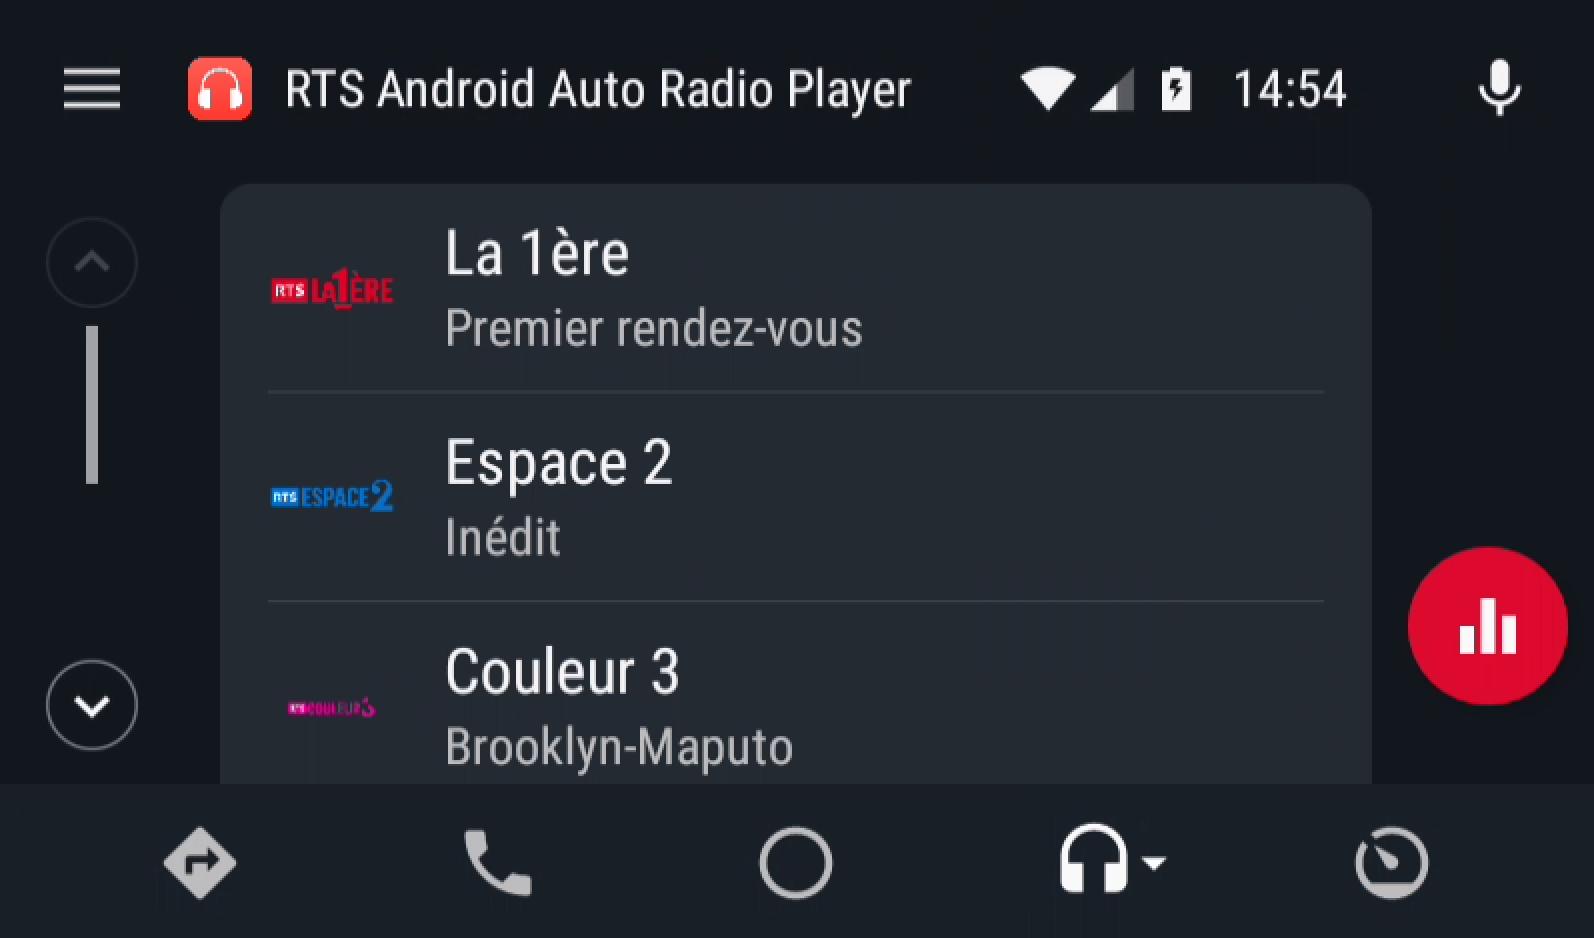 RTS Android Auto Radio Player for Android - APK Download